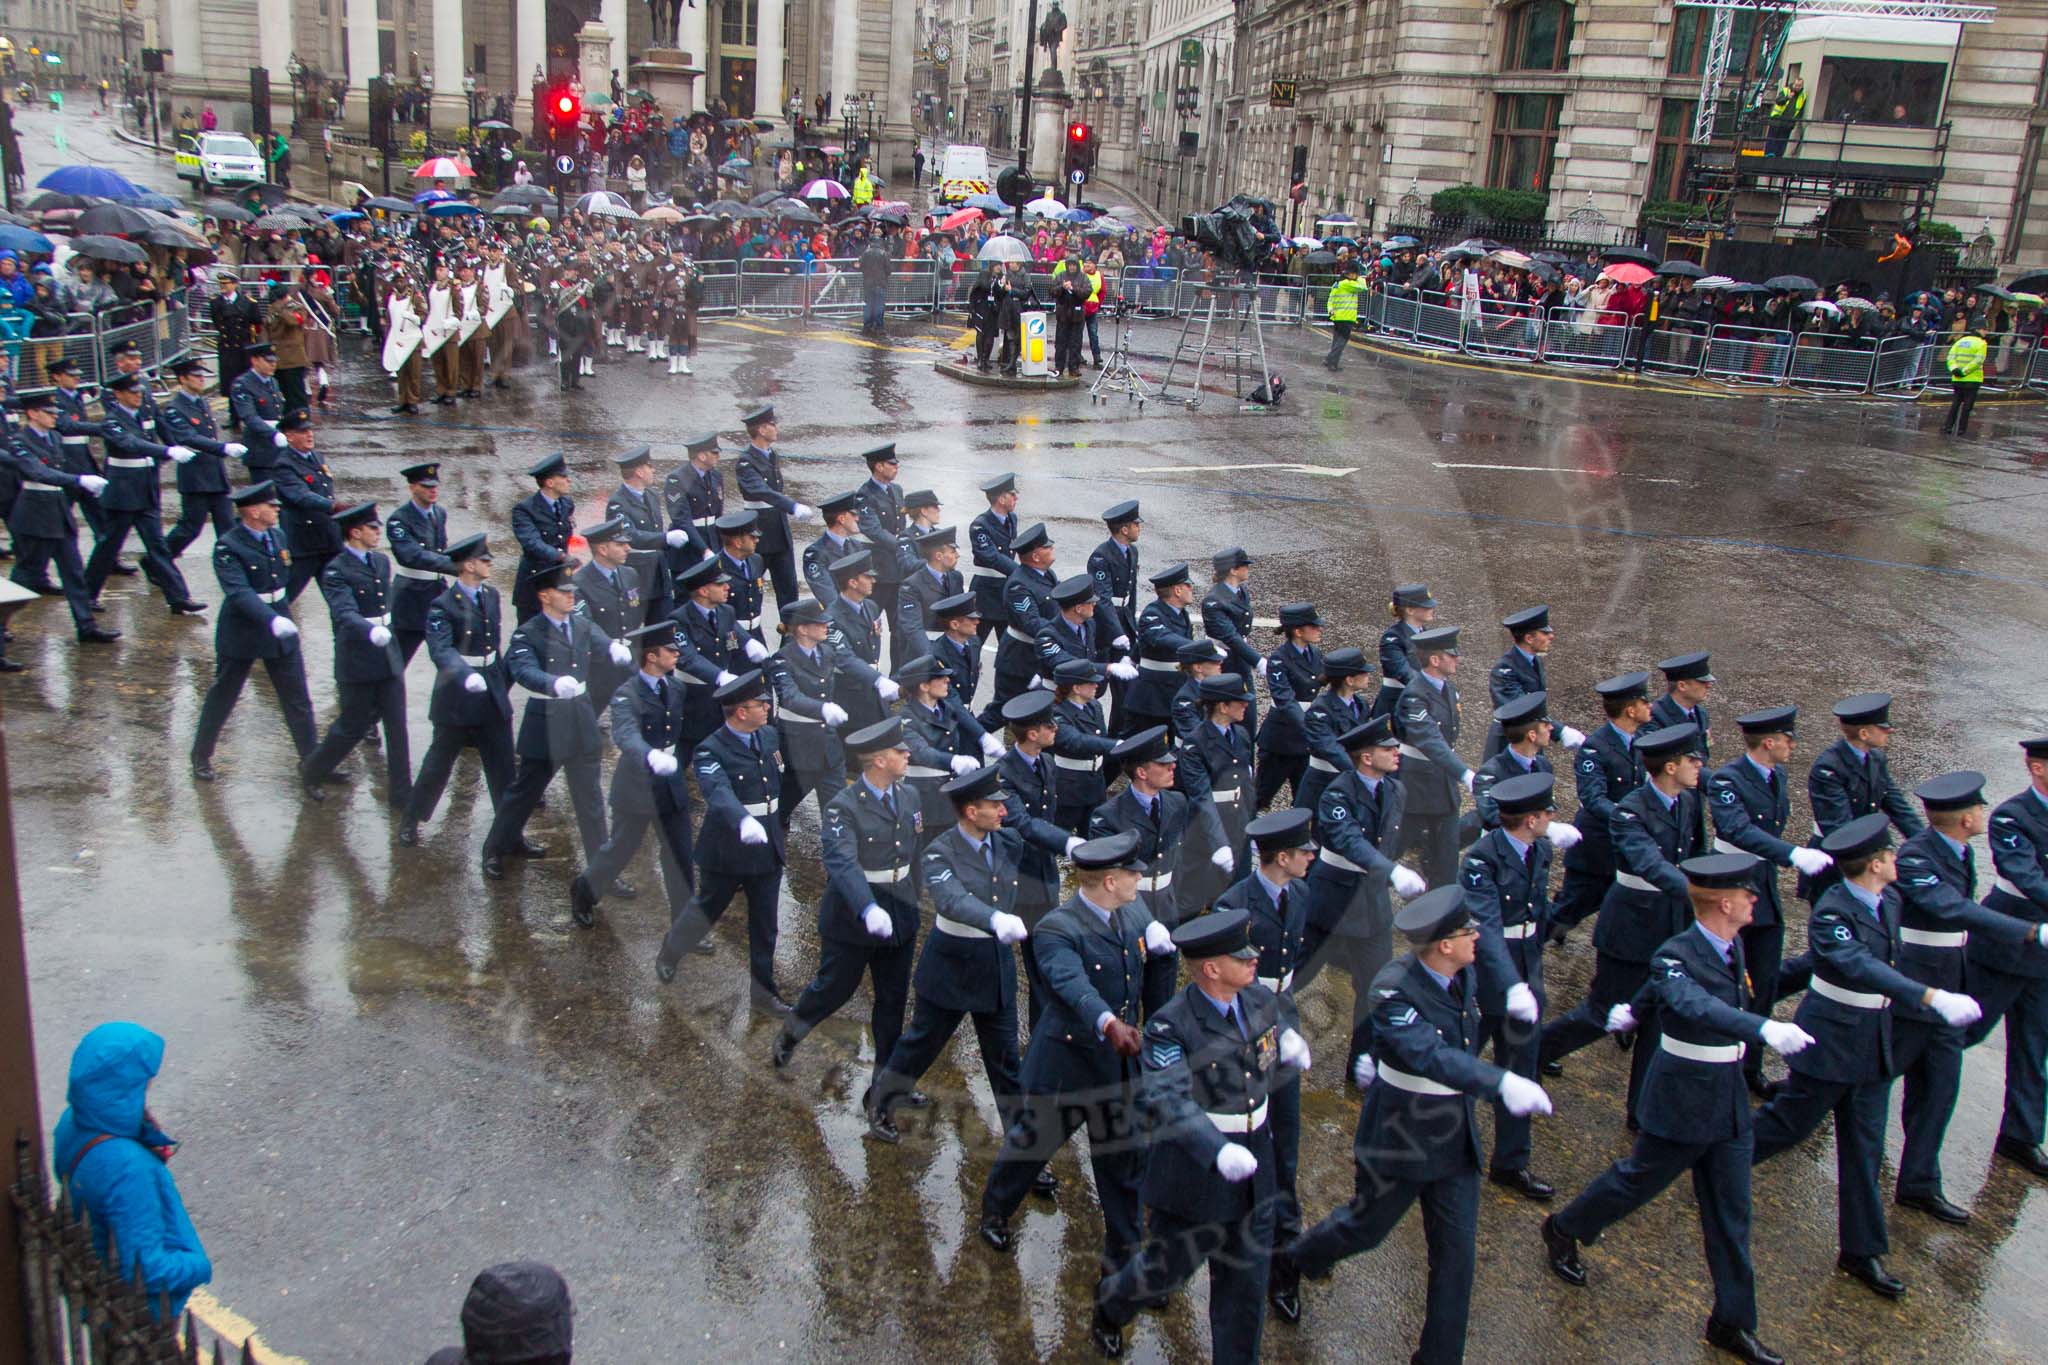 Lord Mayor's Show 2013: 16-Royal Air Force- marching contingent includes Regular and Reserve personnel..
Press stand opposite Mansion House, City of London,
London,
Greater London,
United Kingdom,
on 09 November 2013 at 11:08, image #294